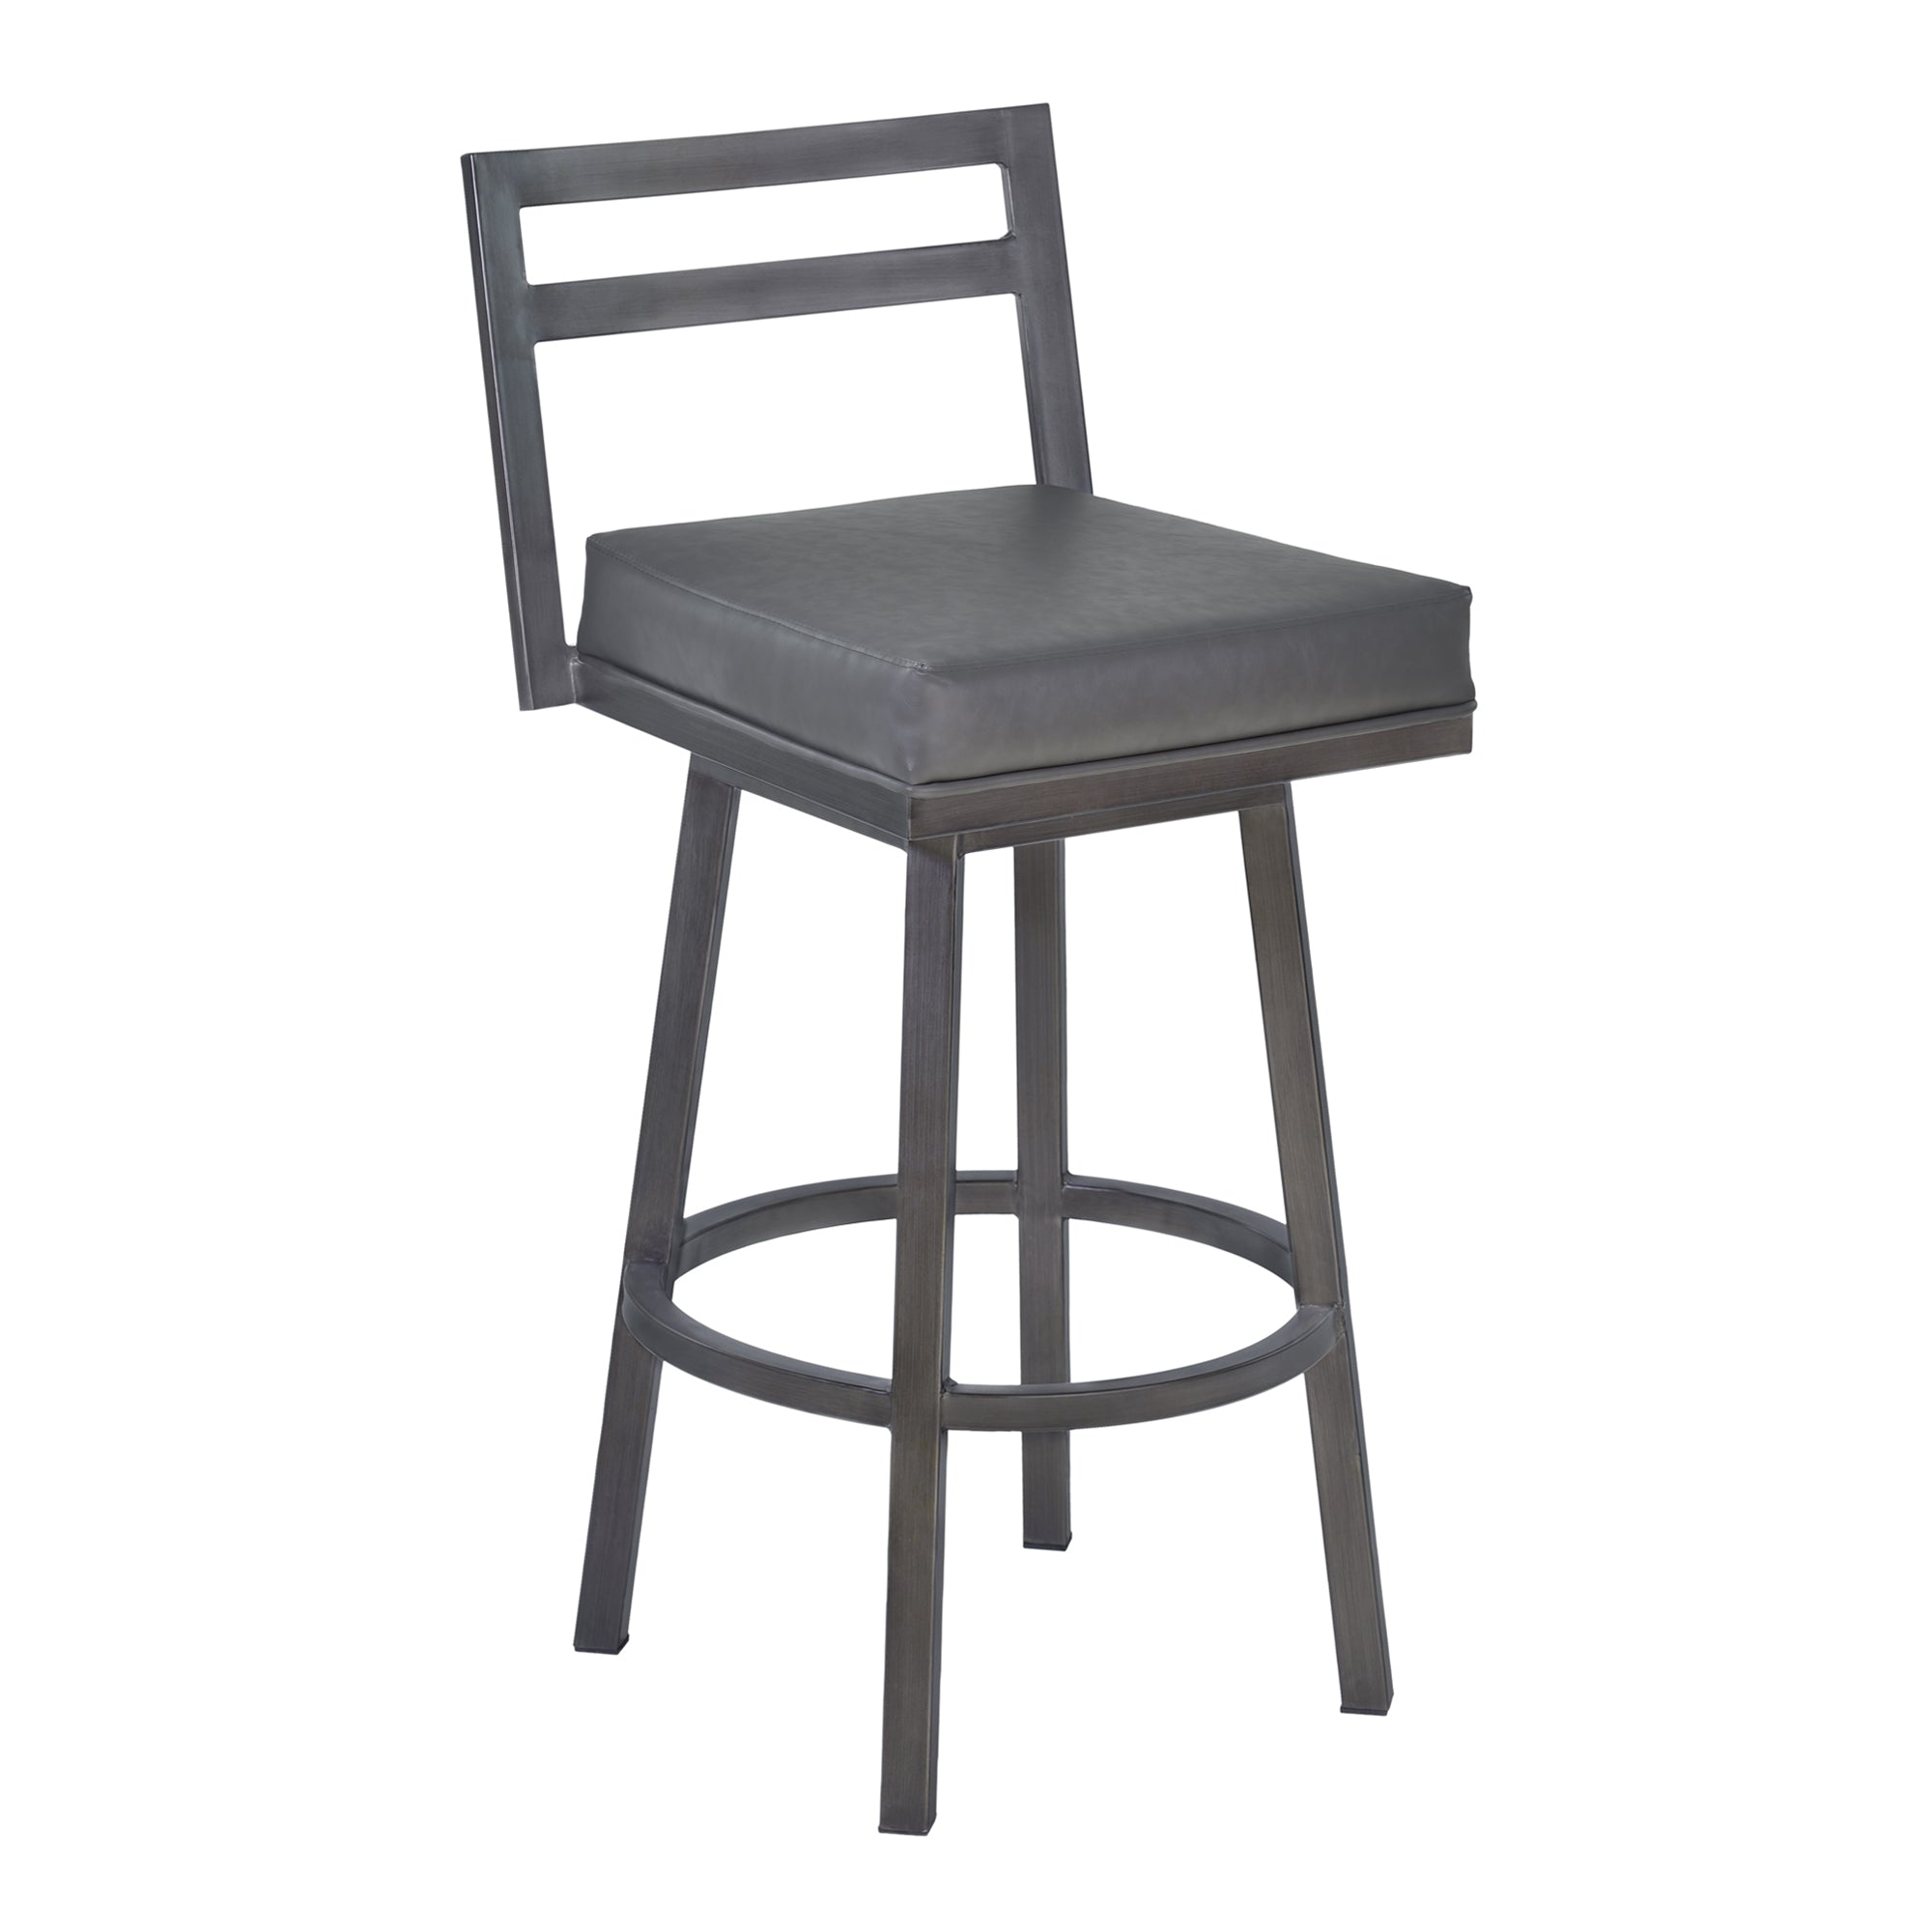 Armen Living LCMOBAVG30 Moniq 30 Bar Height Metal Swivel Barstool in Vintage Grey Faux Leather and Mineral Finish